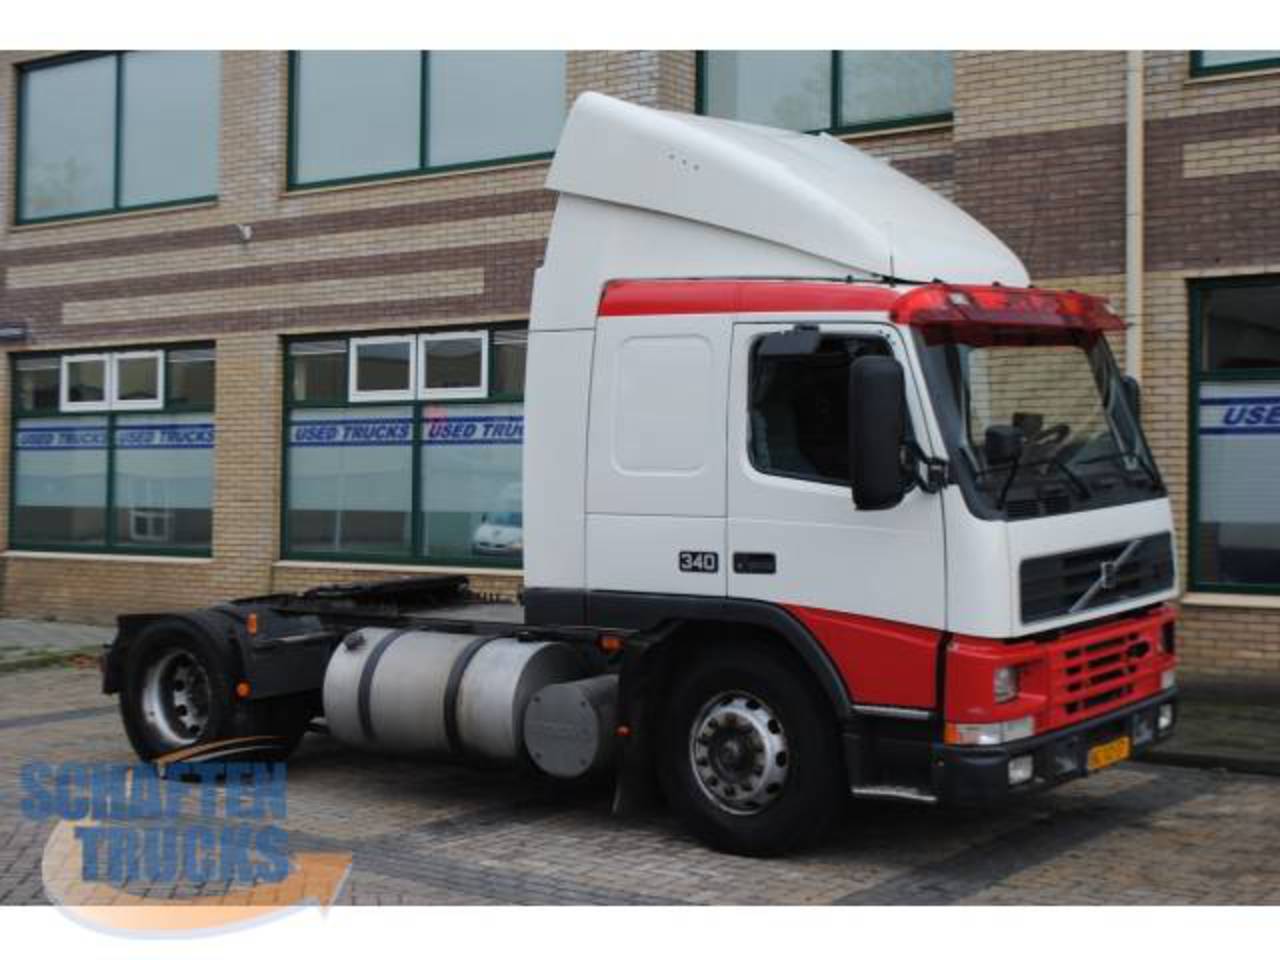 Volvo fm 340. Best photos and information of modification.